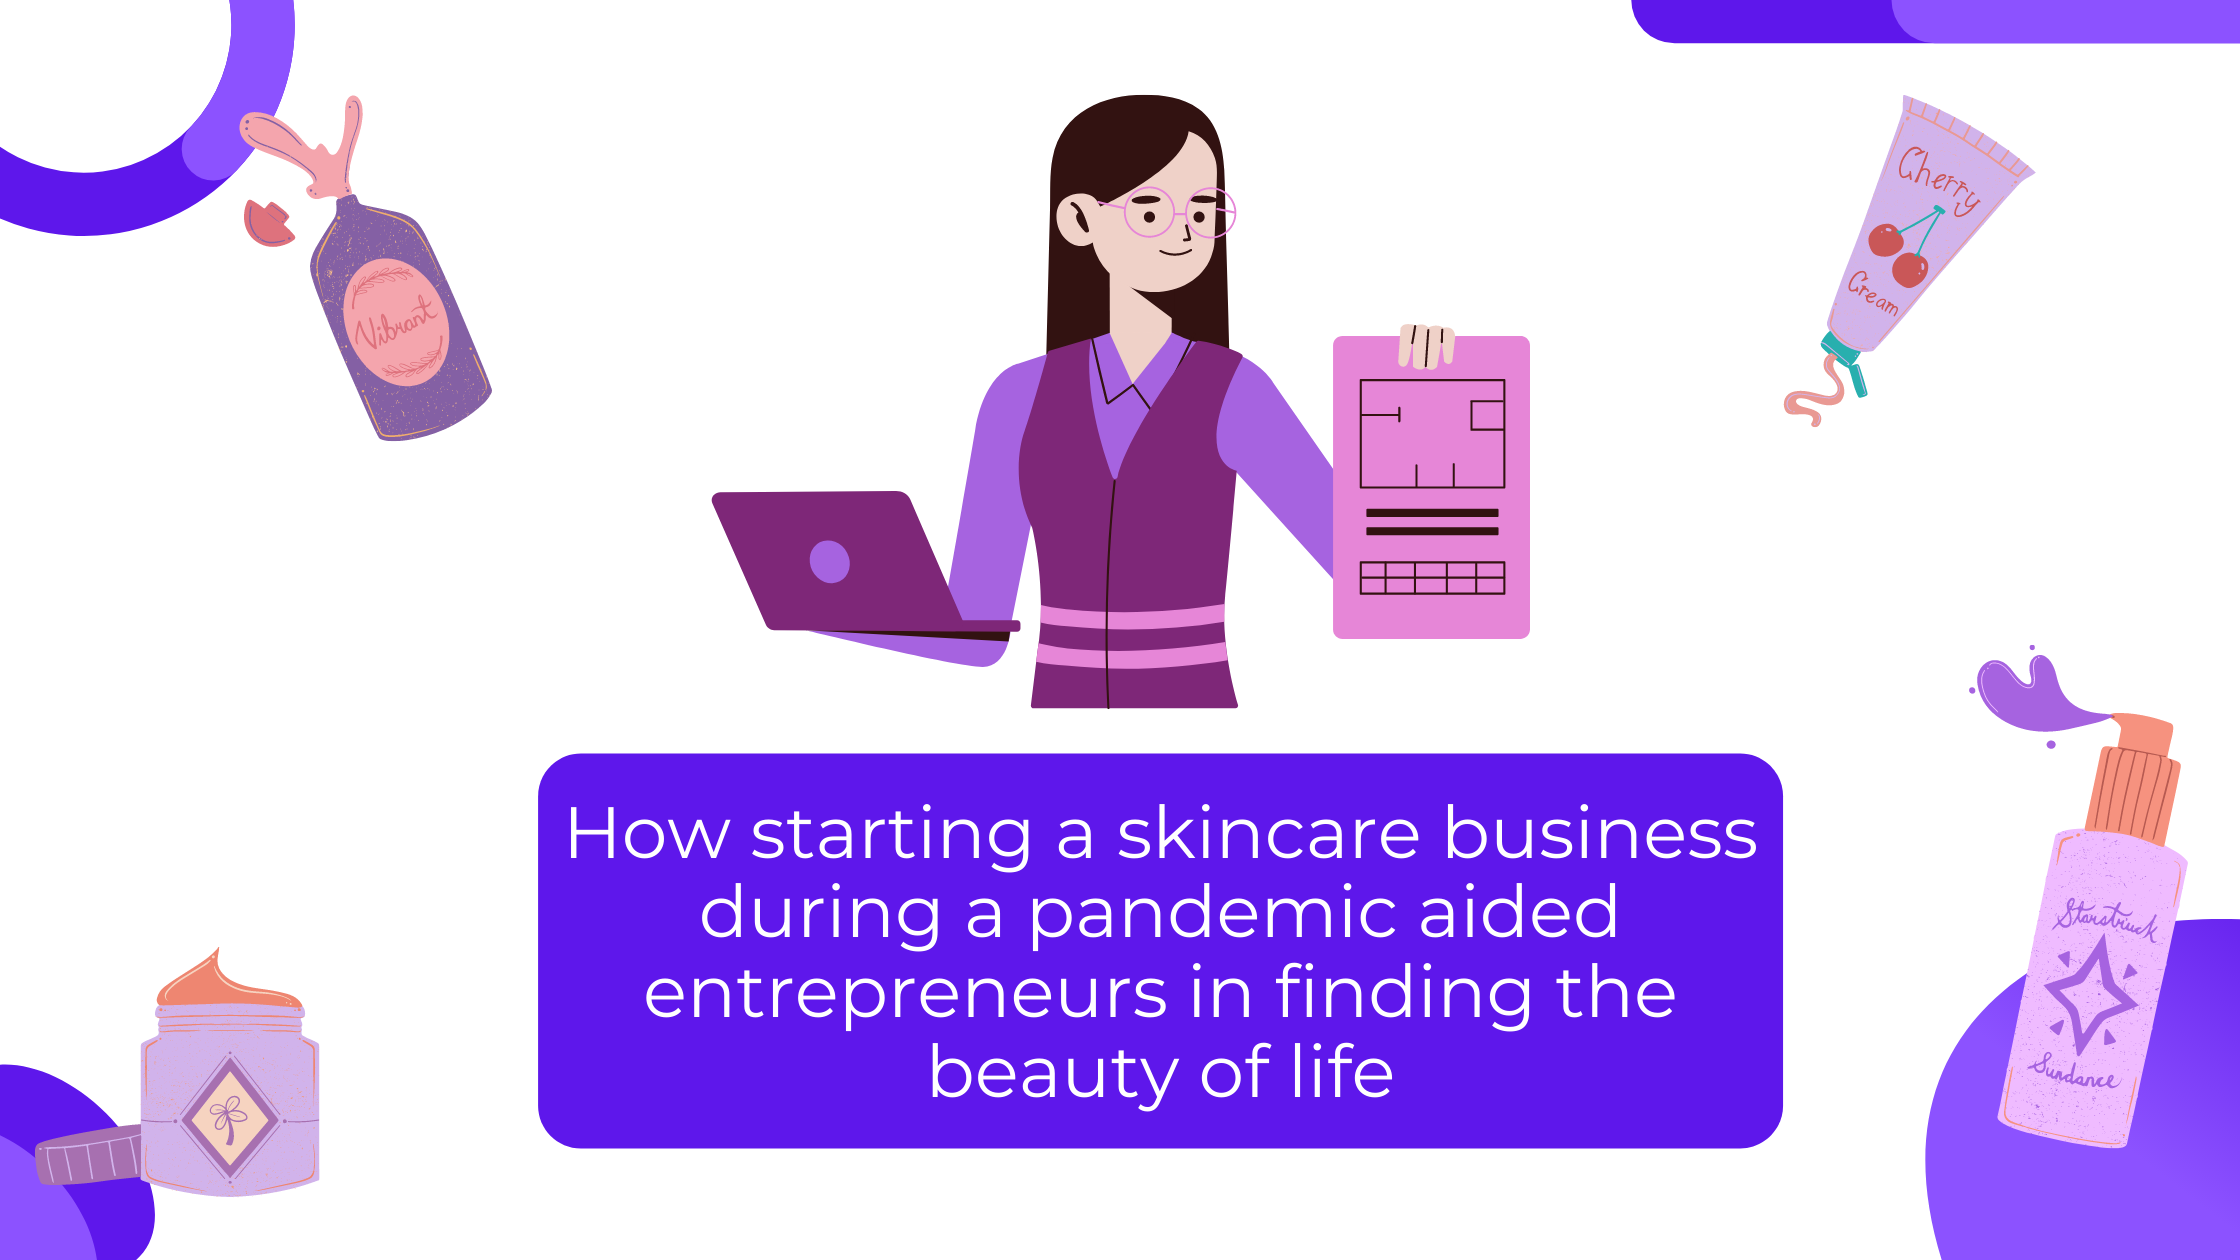 How starting a skincare business during a pandemic aided entrepreneurs in finding the beauty of life